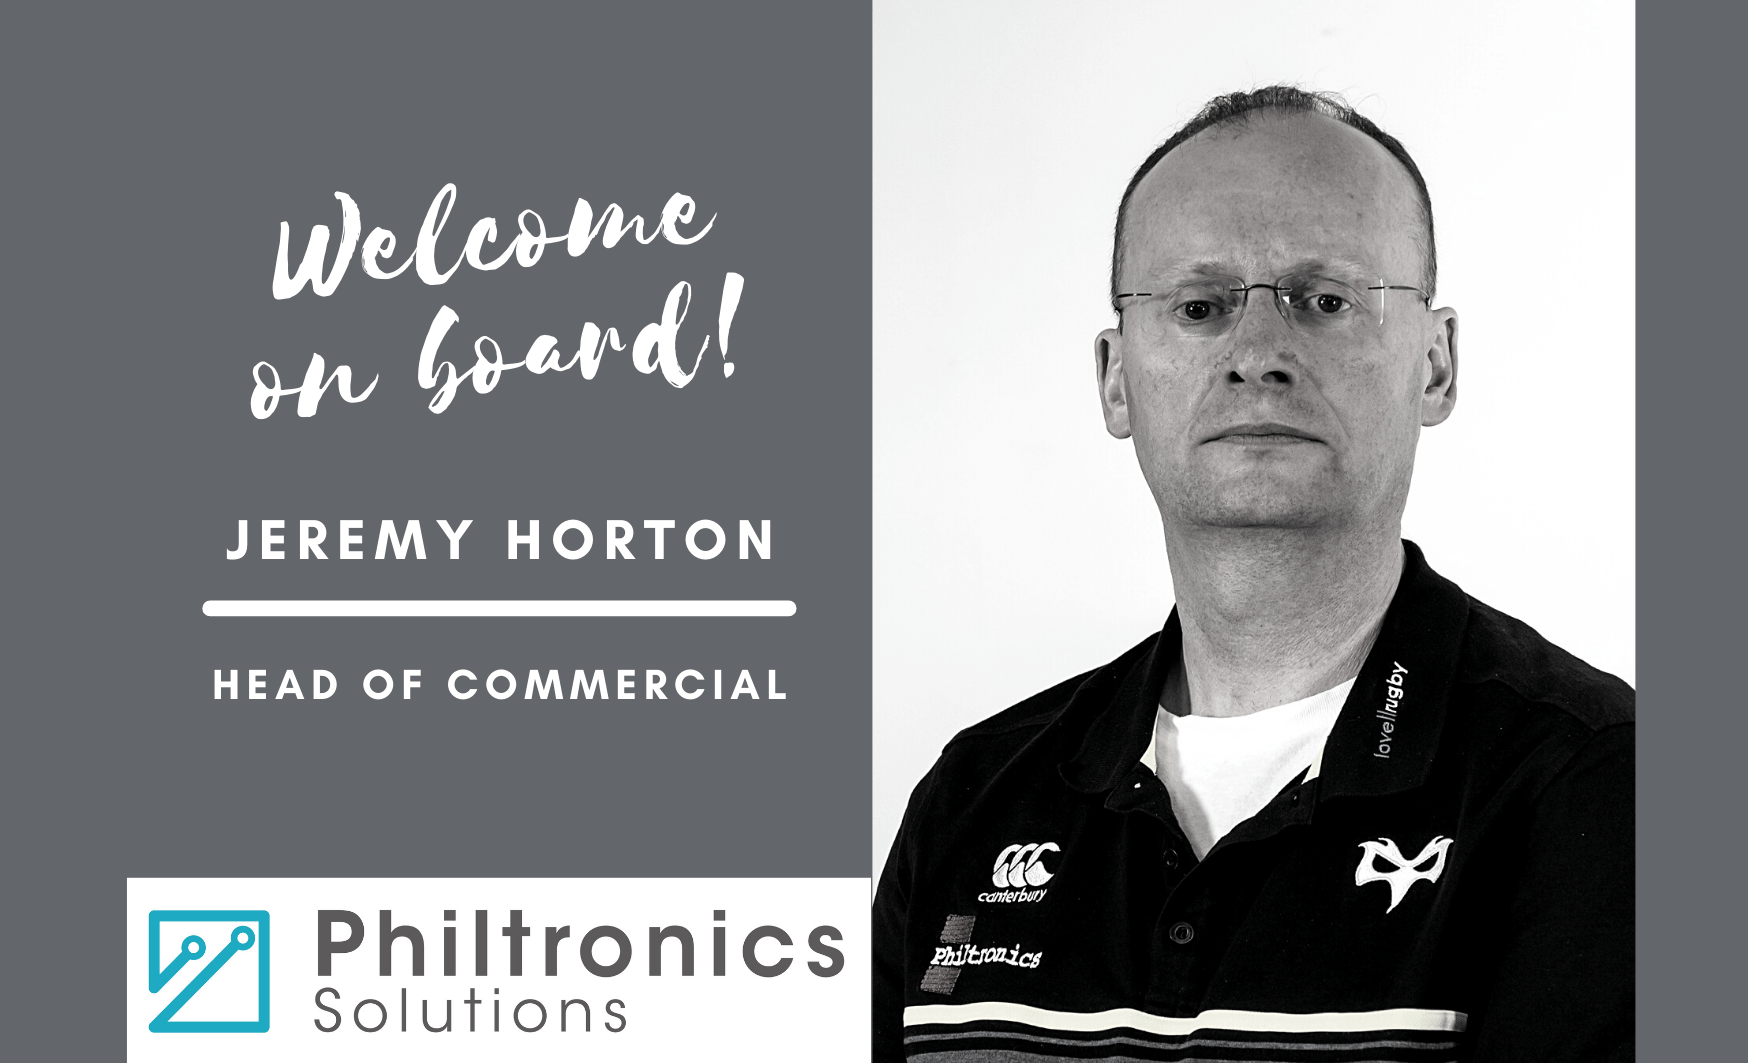 Jeremy Horton joins the Philtronics Solutions team as Head of Commercial